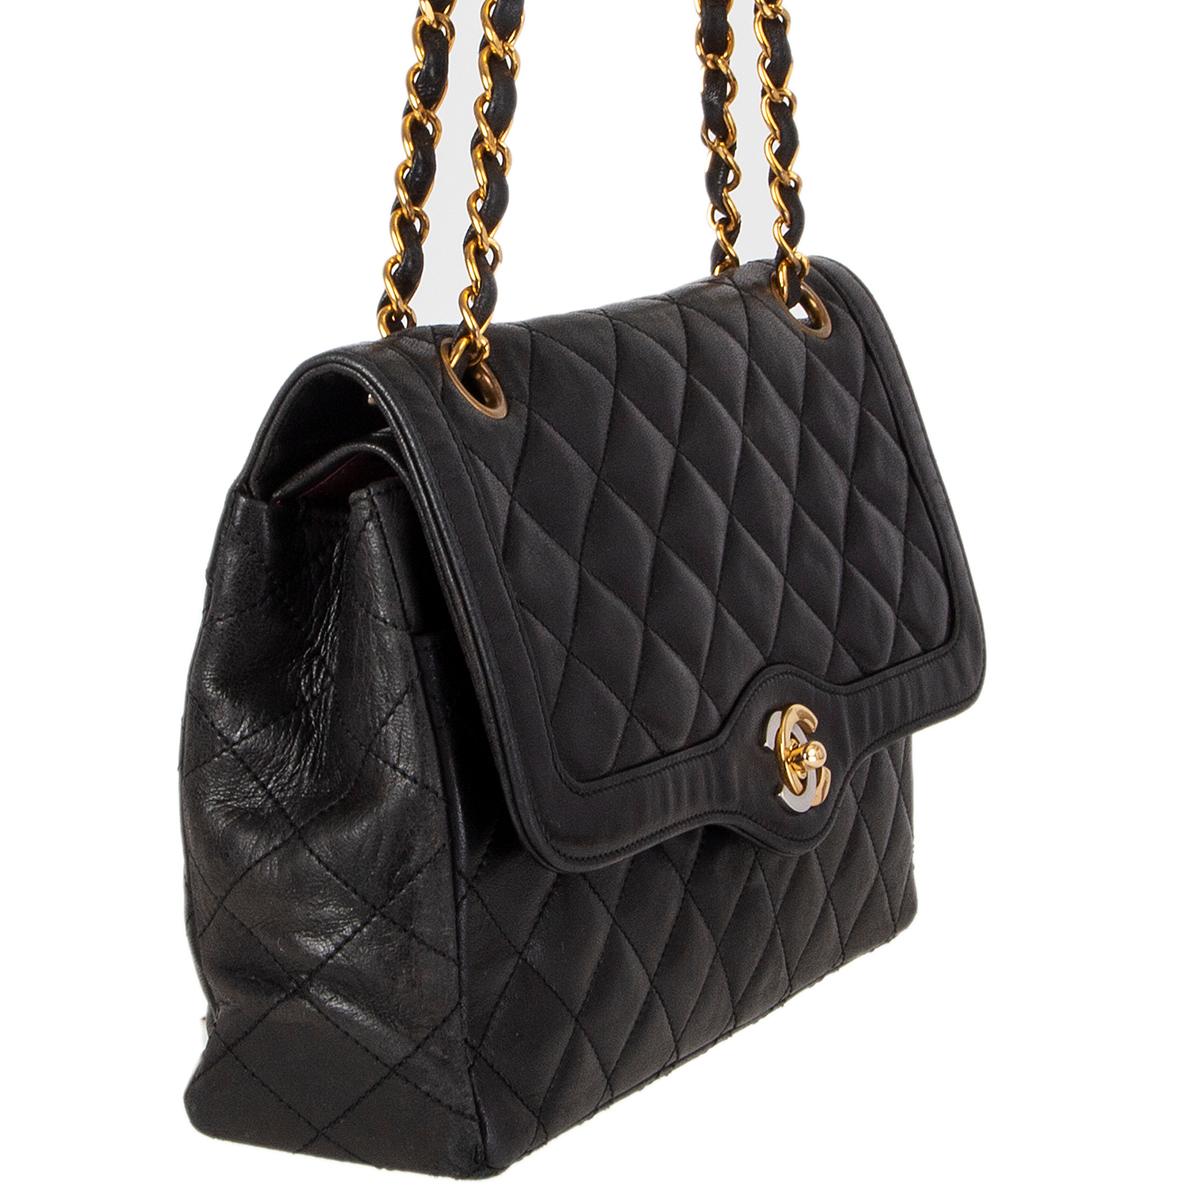 Chanel Vintage double flap shoulder bag in black quilted calfskin featuring gold- and silver-tone 'CC' turn lock. Outside pocket on the back and under the flap. Lined in burgundy calfskin with with tow open pocket and a lipstick pocket against the